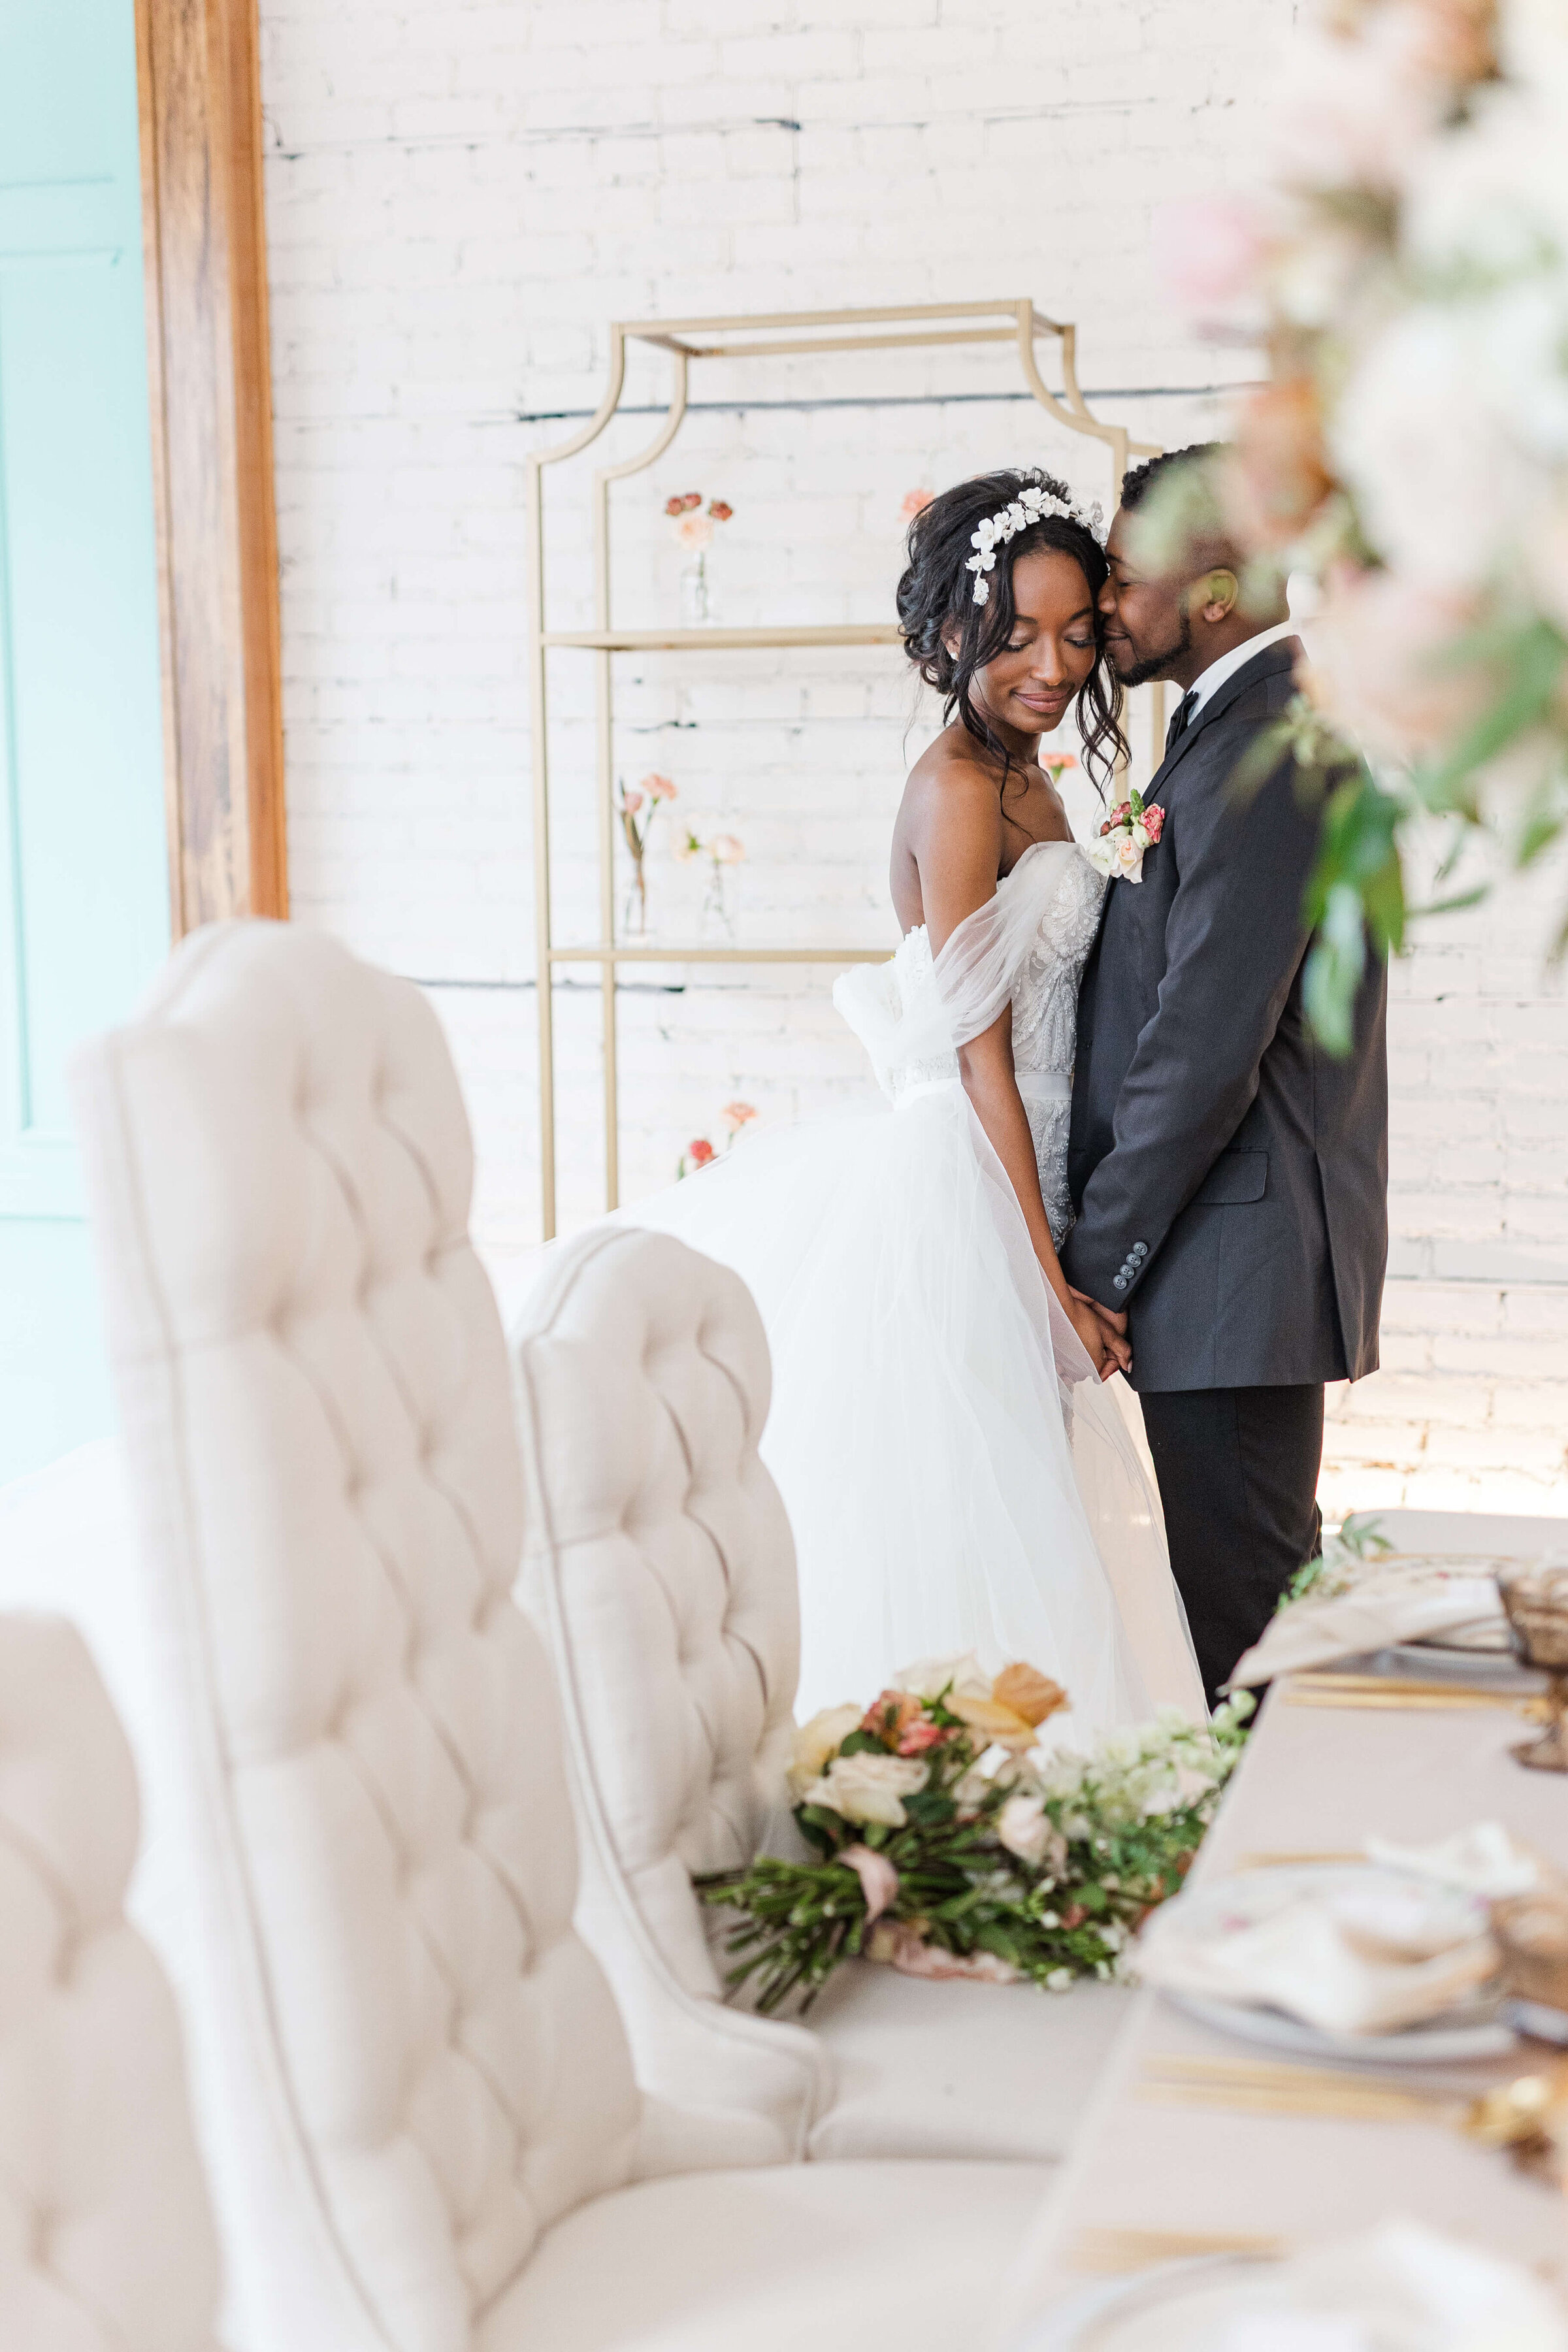 A bride stands in front of her groom as he kisses her check and she looks down. They are standing inside by their white dining table covered in florals.